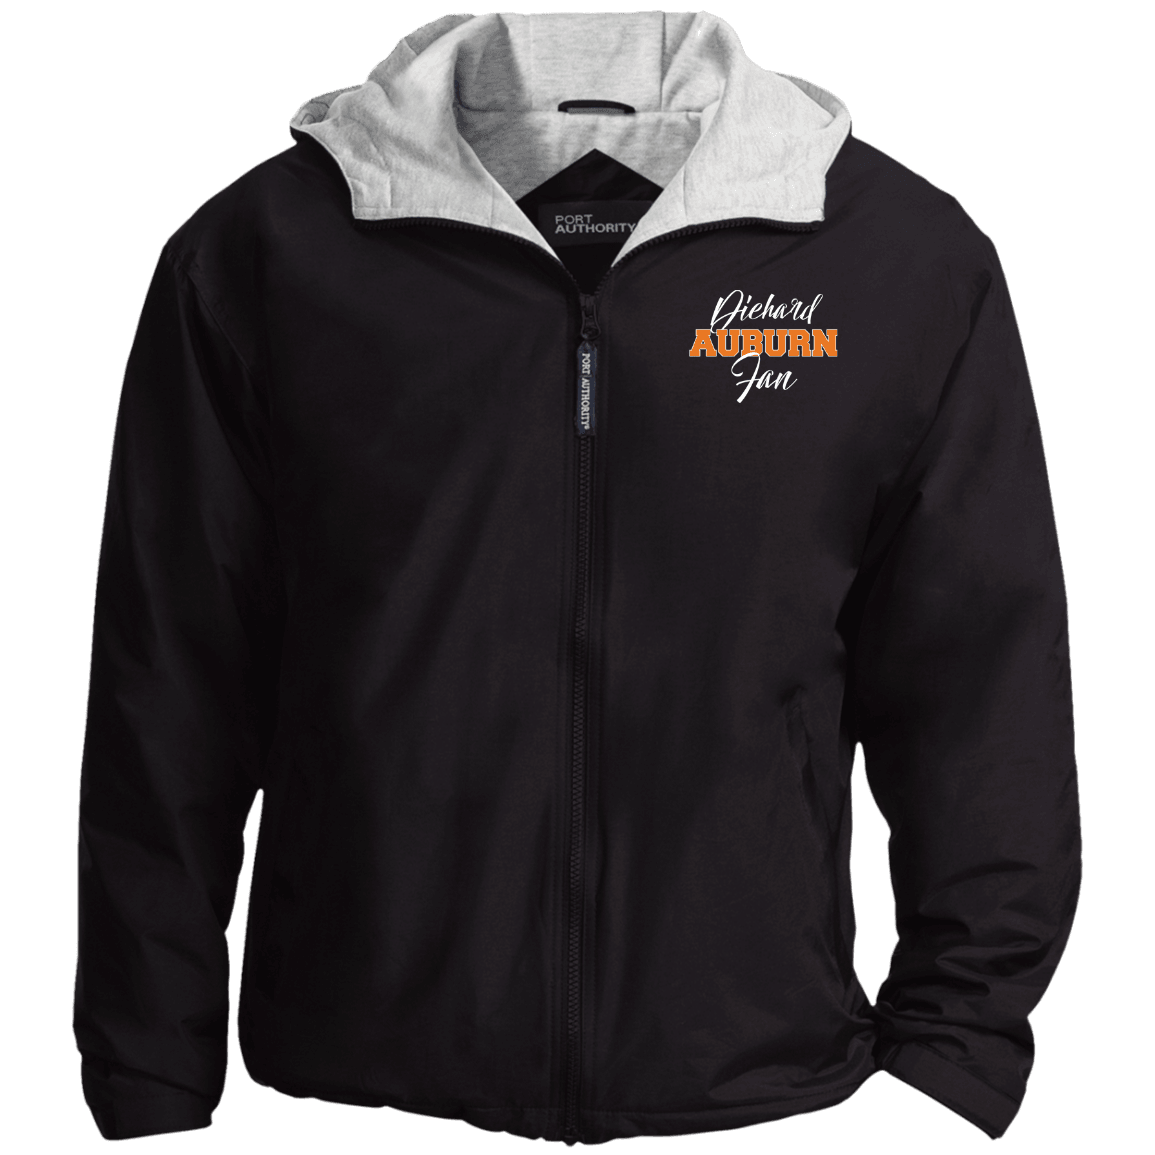 Designs by MyUtopia Shout Out:Diehard Auburn Fan Embroidered Port Authority Team Jacket,Black/Light Oxford / X-Small,Jackets